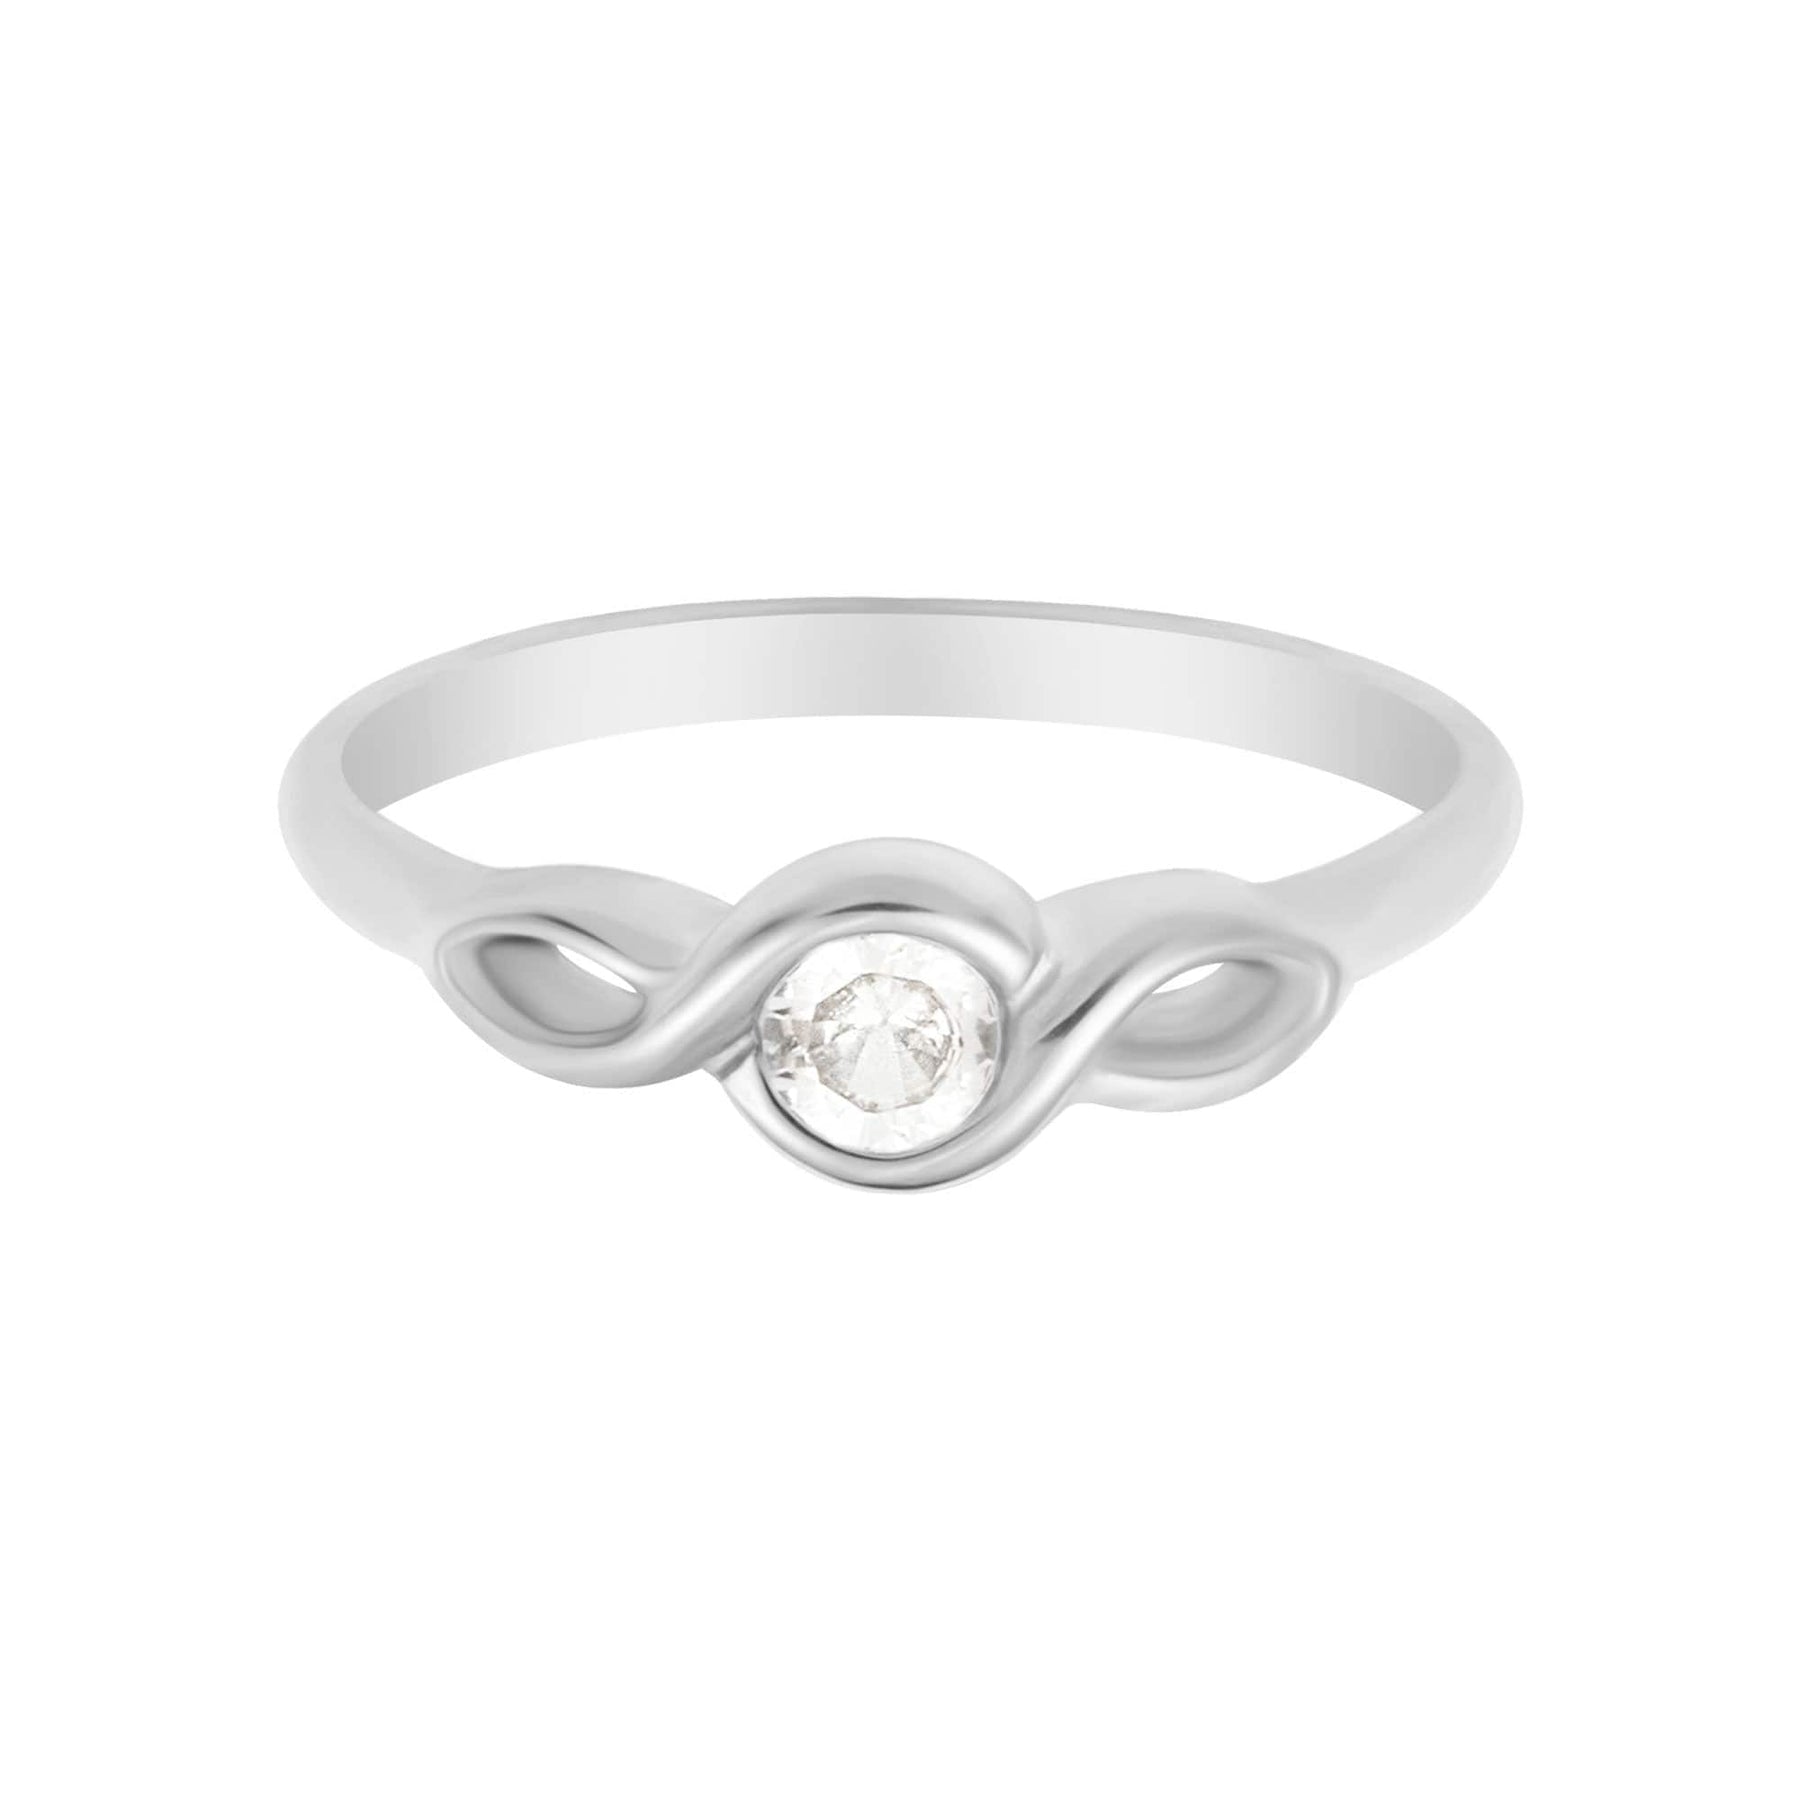 BohoMoon Stainless Steel Embrace Ring Silver / US 6 / UK L / EUR 51 (small)